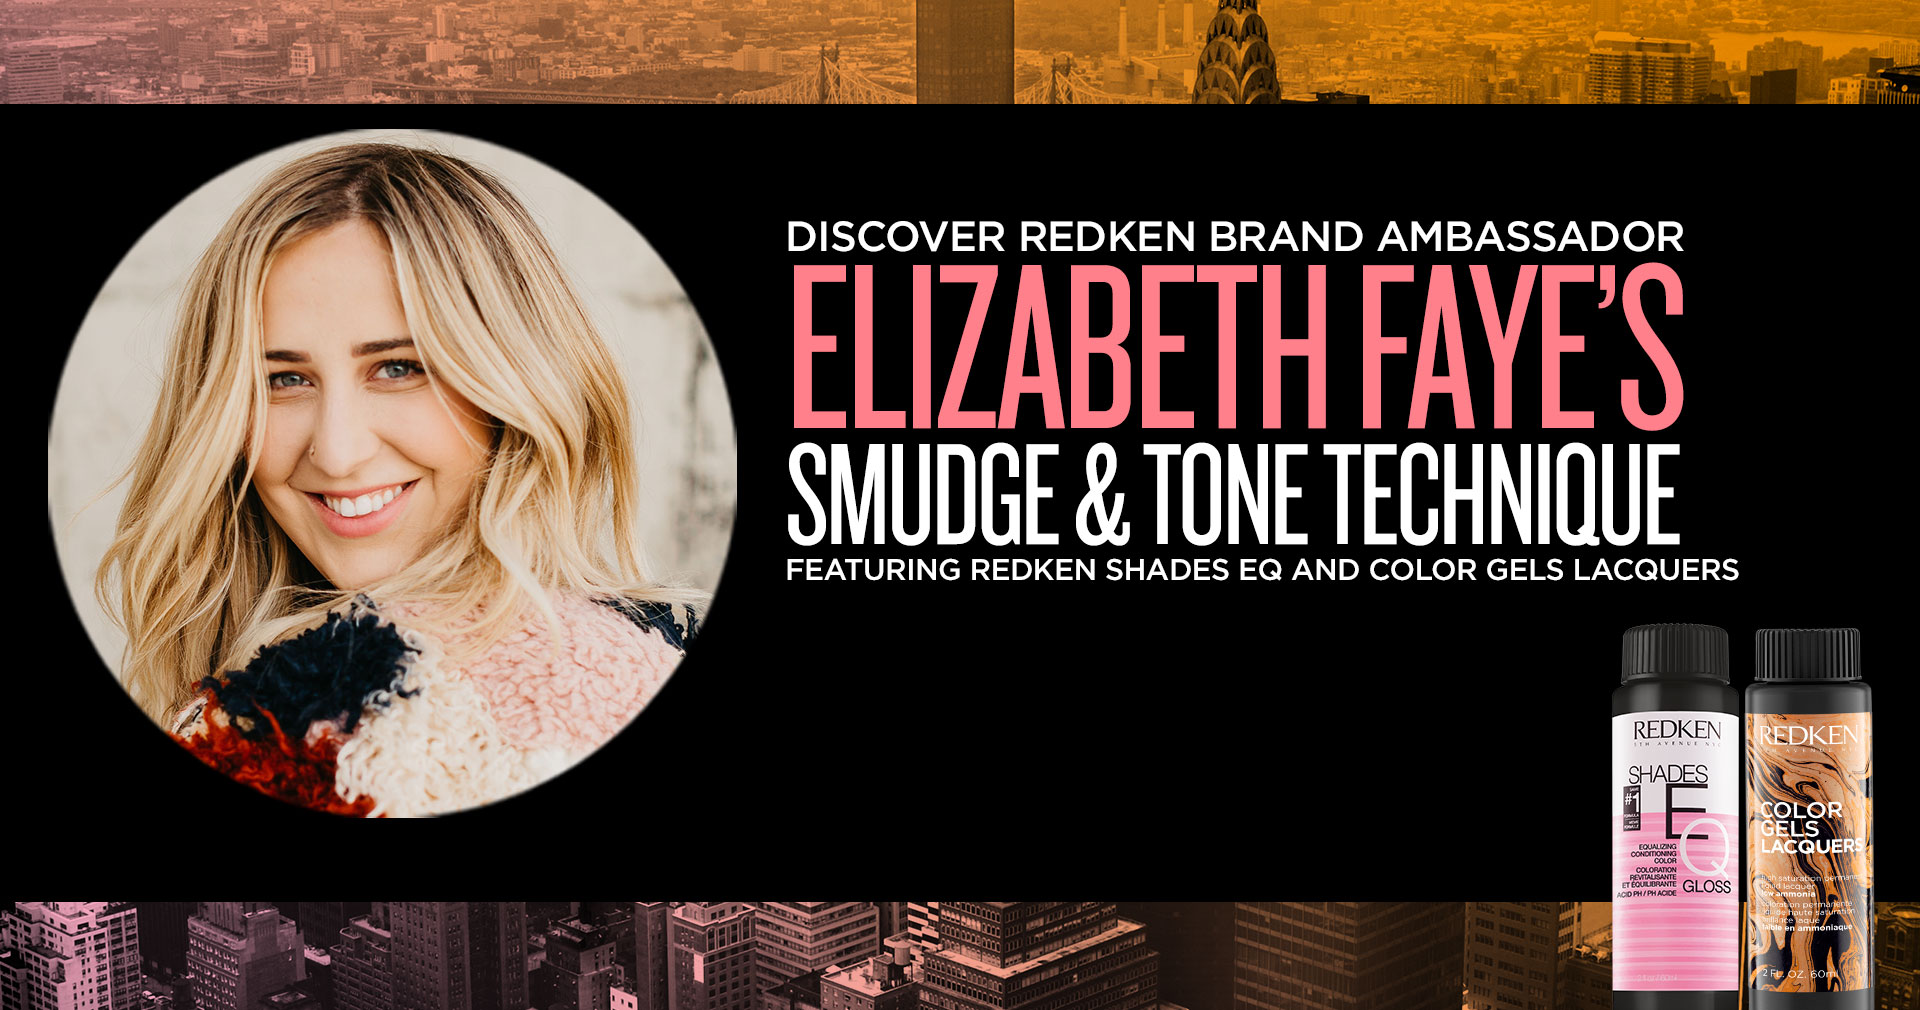 ch-discover-the-smudge-and-tone-technique-with-redken-brand-ambassador-elizabeth-faye